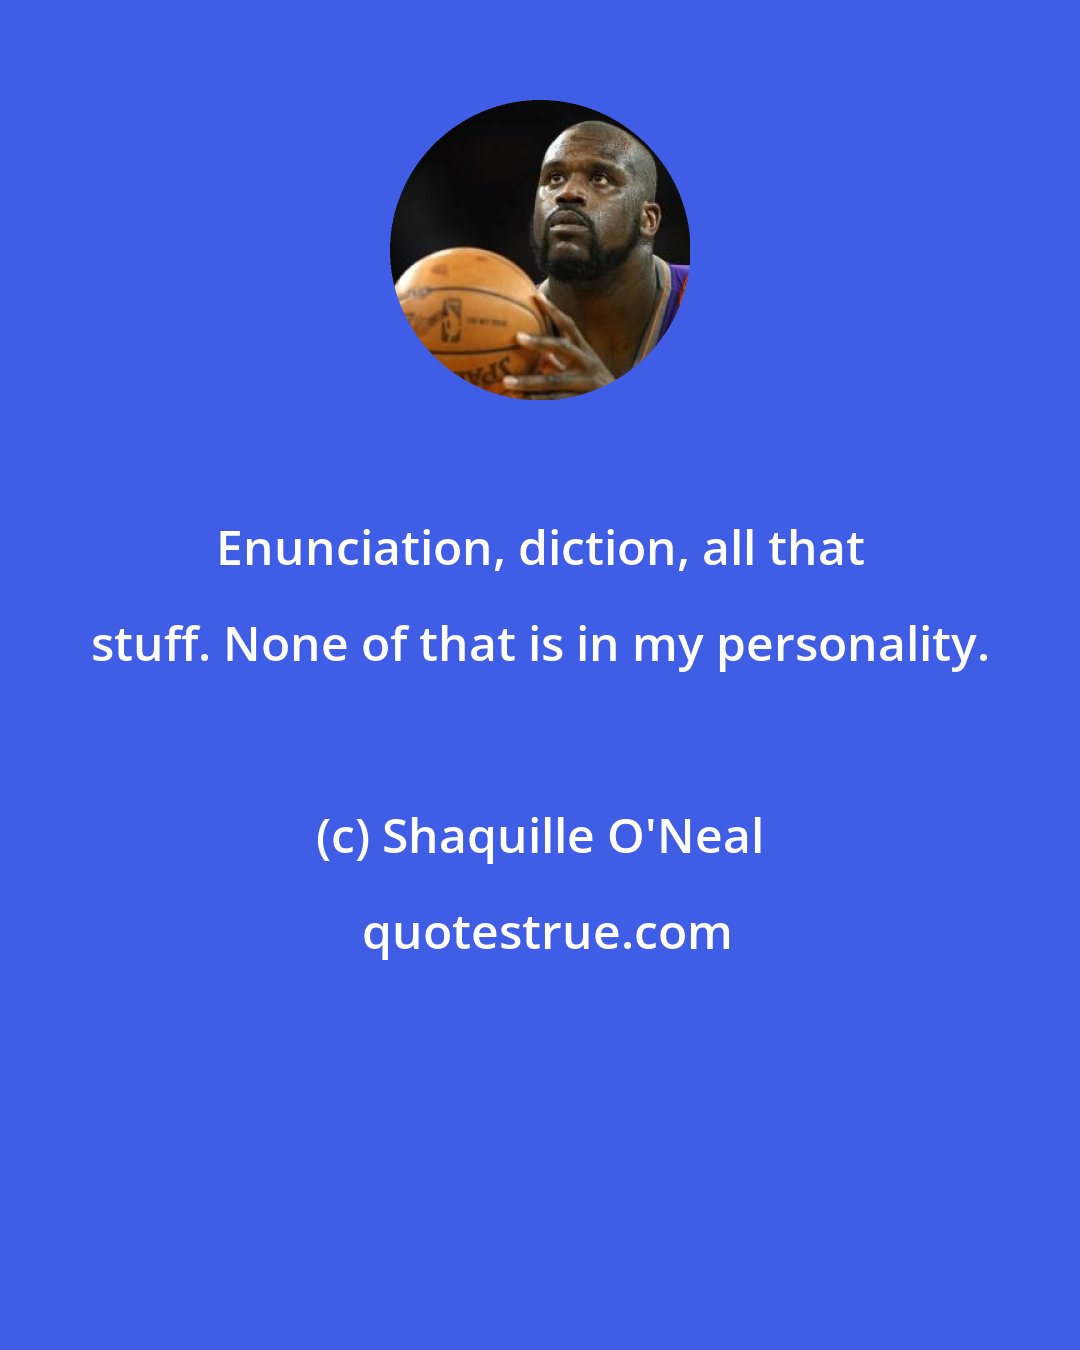 Shaquille O'Neal: Enunciation, diction, all that stuff. None of that is in my personality.